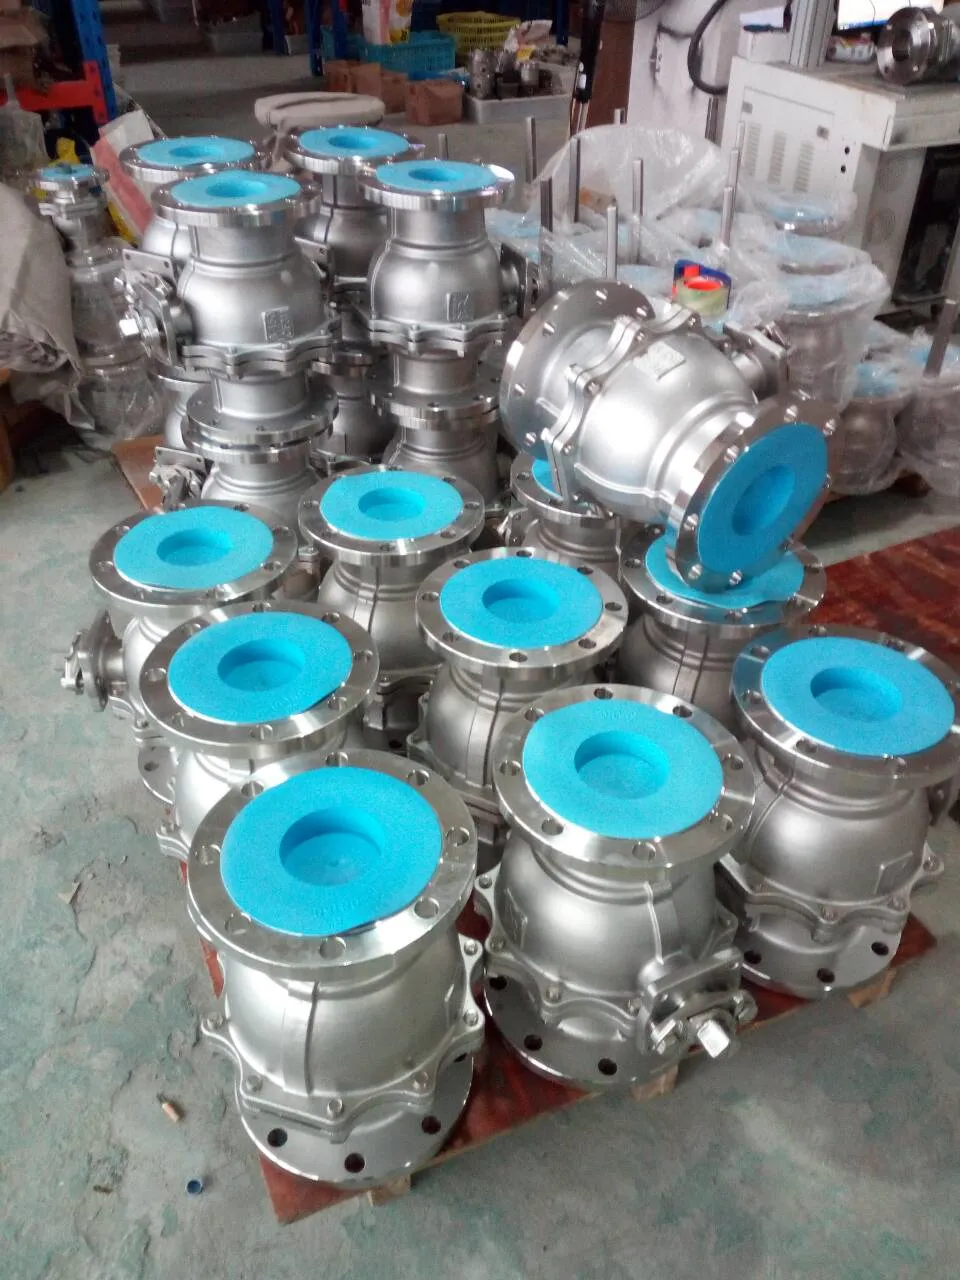 Excellent Ball Valve Supplier - 2PC 150lbs Flange Ball Valve with Mounting Pad